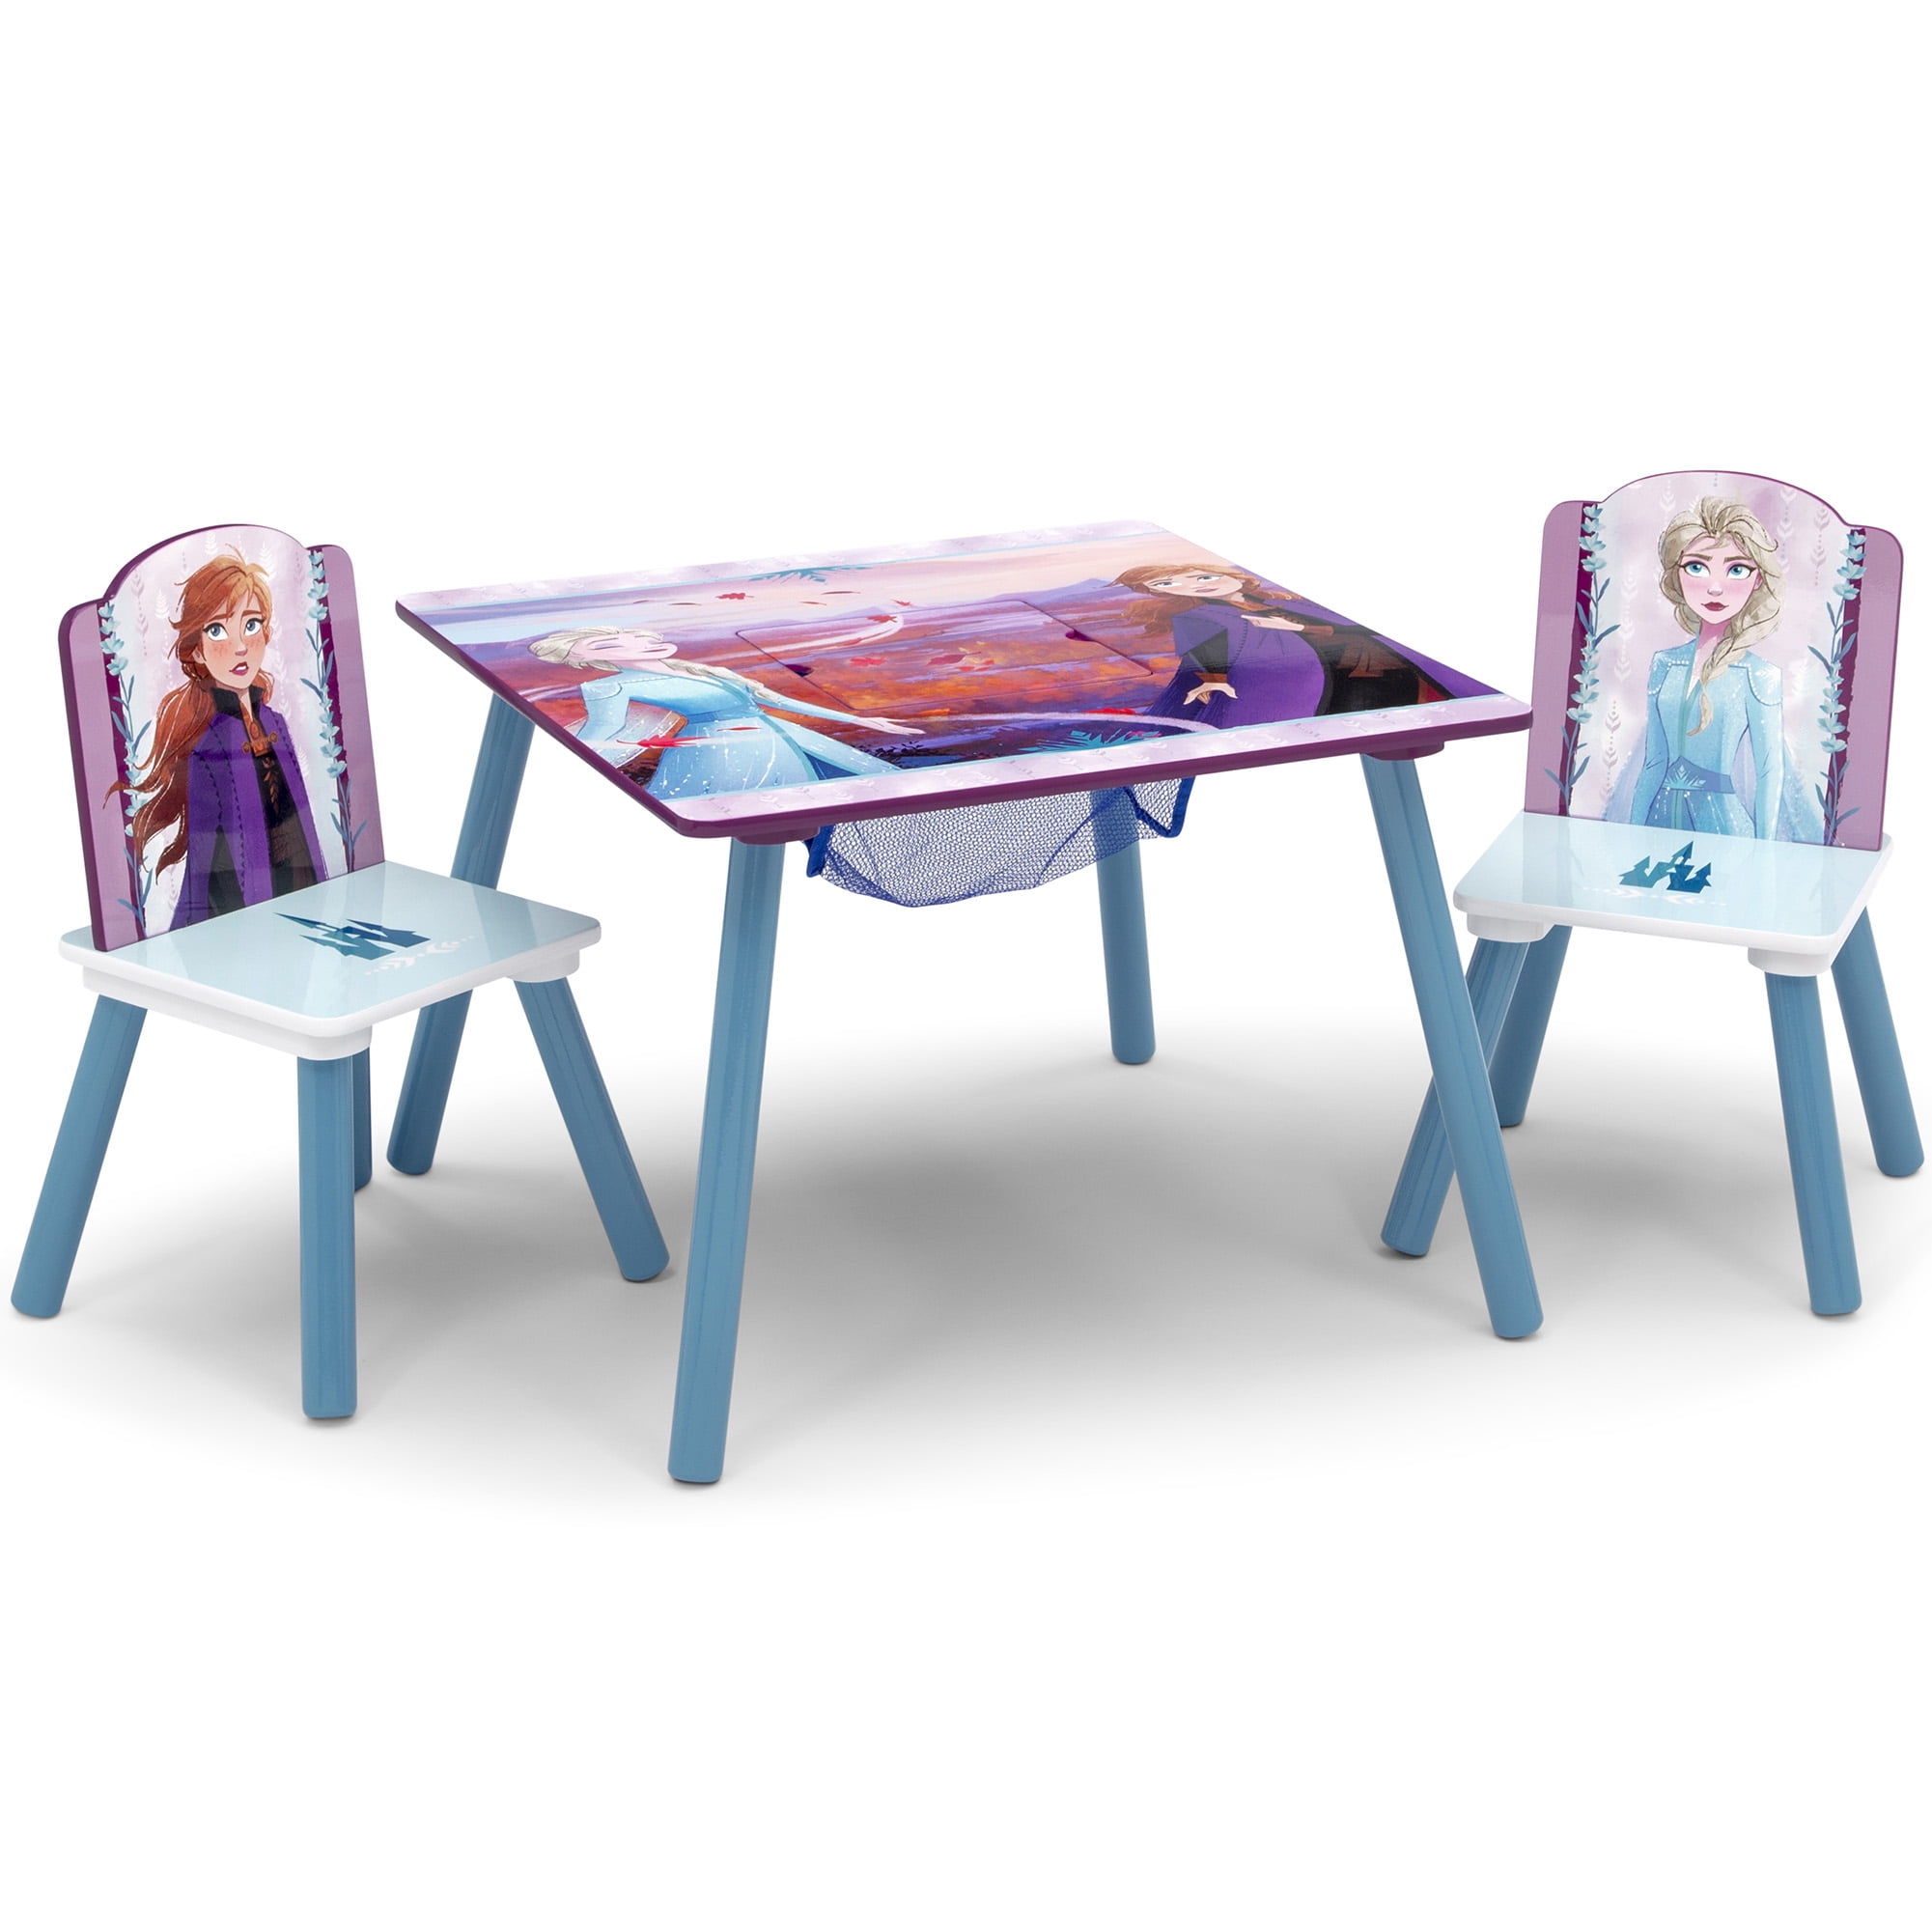 Disney Frozen II Table and Chair Set with Storage by Delta